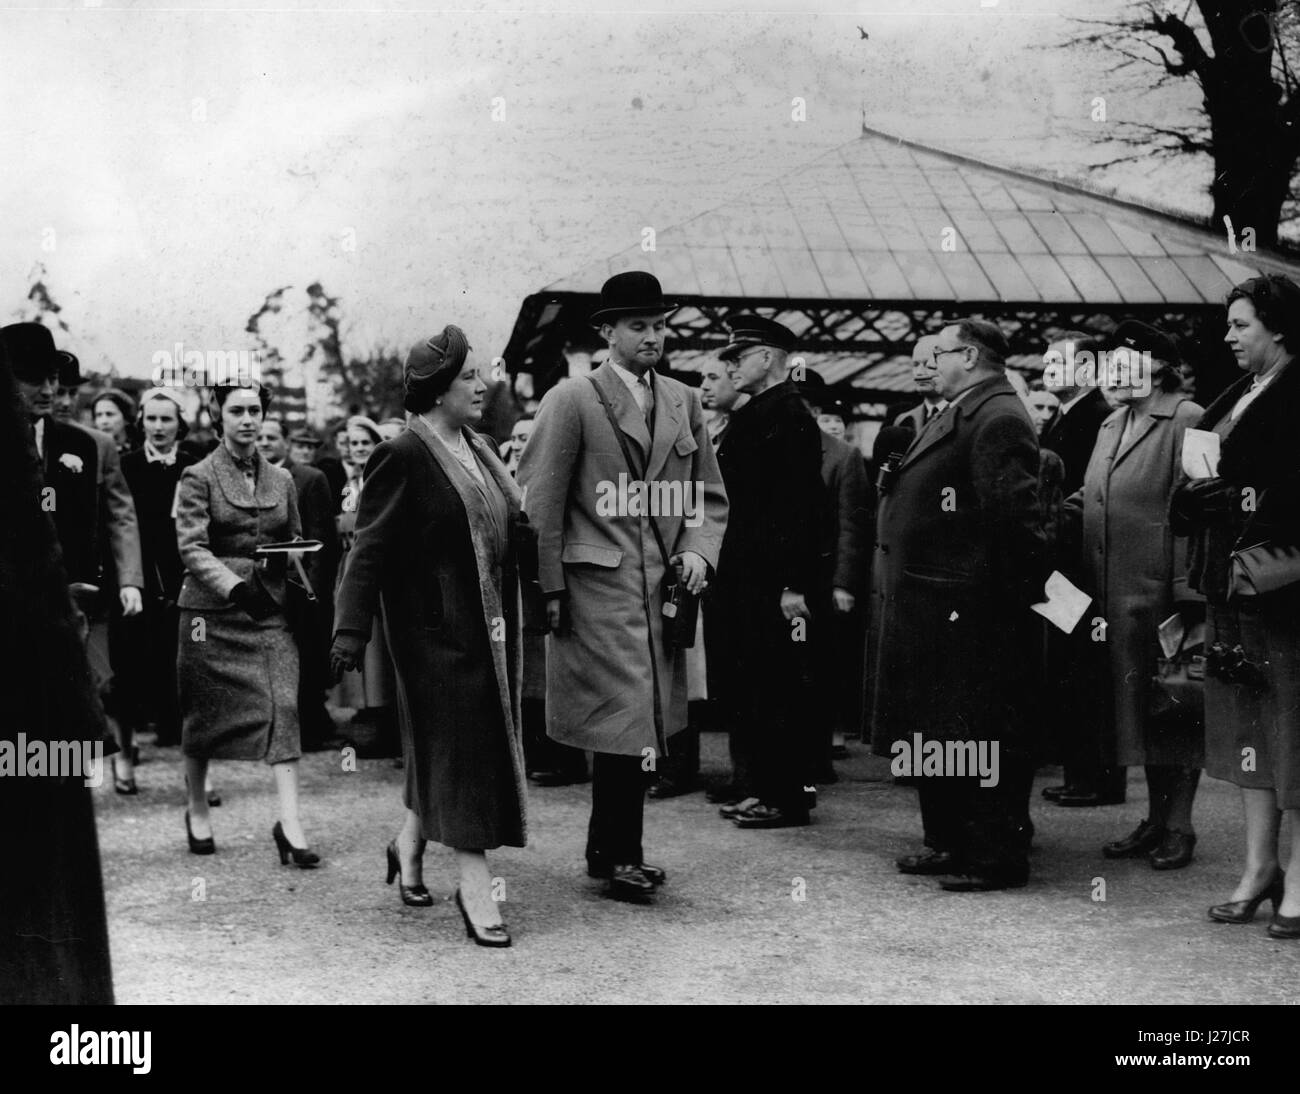 Nov. 11, 1953 - Queen Mother Sees Her Horse Win At Kempton Park Races: The Queen Mother and Princess Margaret were at Kempton Park races this afternoon, to see the Royal chaser M'as-tu-vu run in the Queen Mother's Colours for the first time. The horse, a French-bred seven year old won the Wimbledon Handicap 'Chase. Photo shows The Queen Mother and Princess Margaret leaving the paddock on her way to the Royal enclosure, after inspecting her horse. (Credit Image: © Keystone Press Agency/Keystone USA via ZUMAPRESS.com) Stock Photo